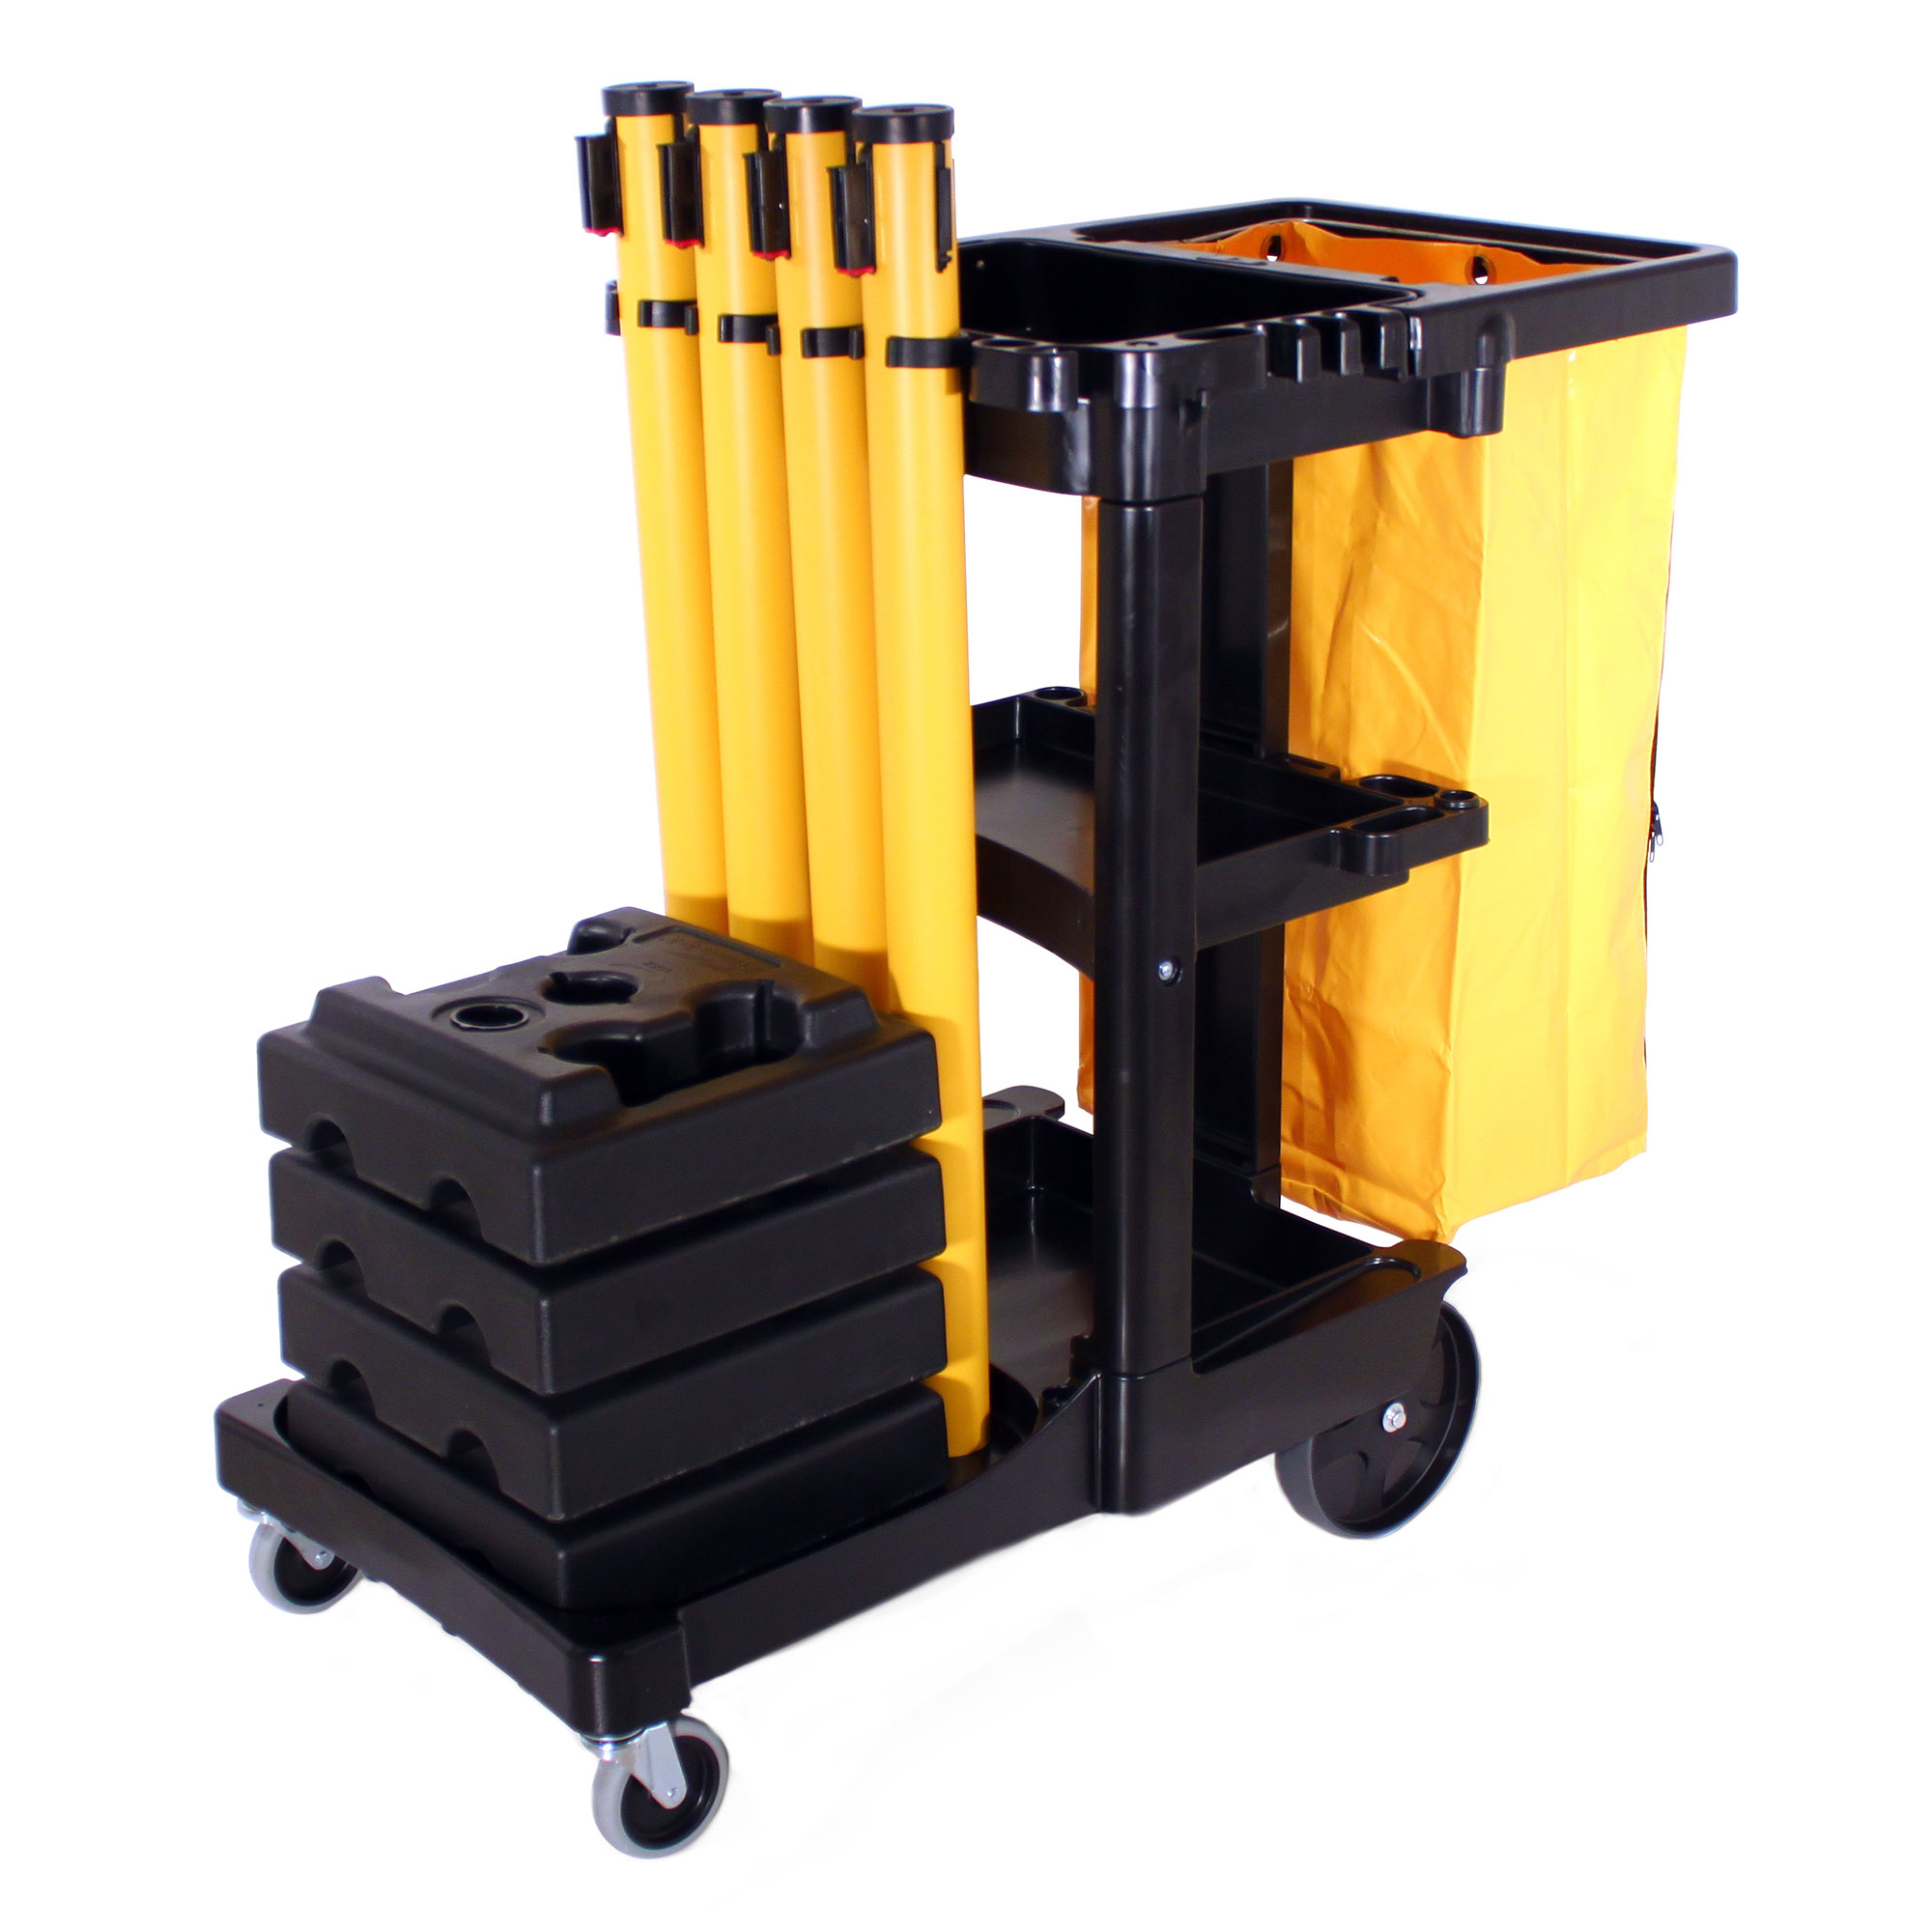 Portable Barrier System with Safety Crowd Blockers & Cart - Visiontron